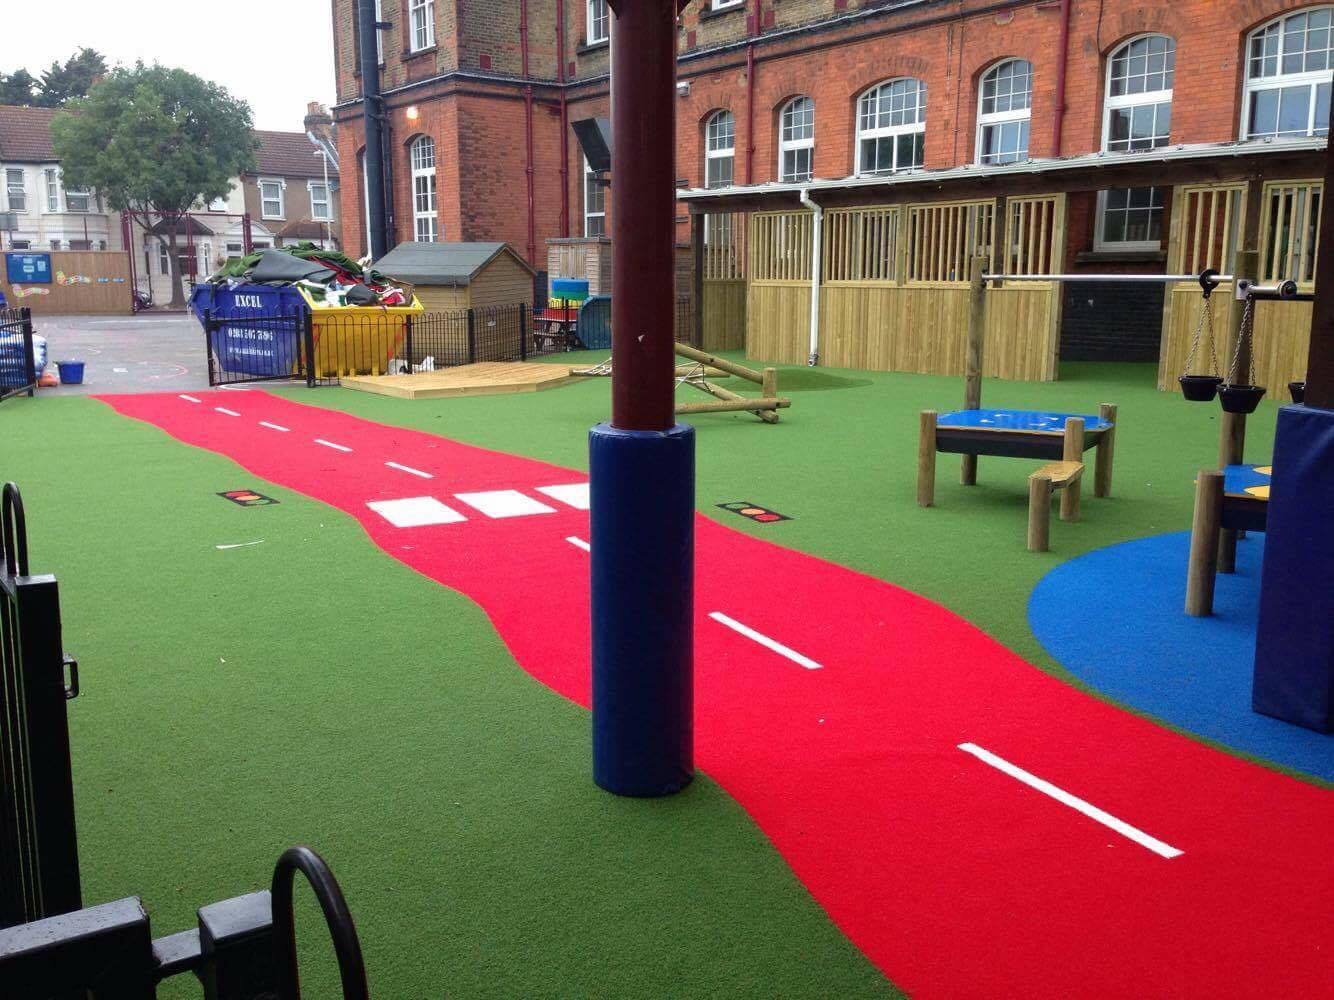 red artificial turf road markings in school playground